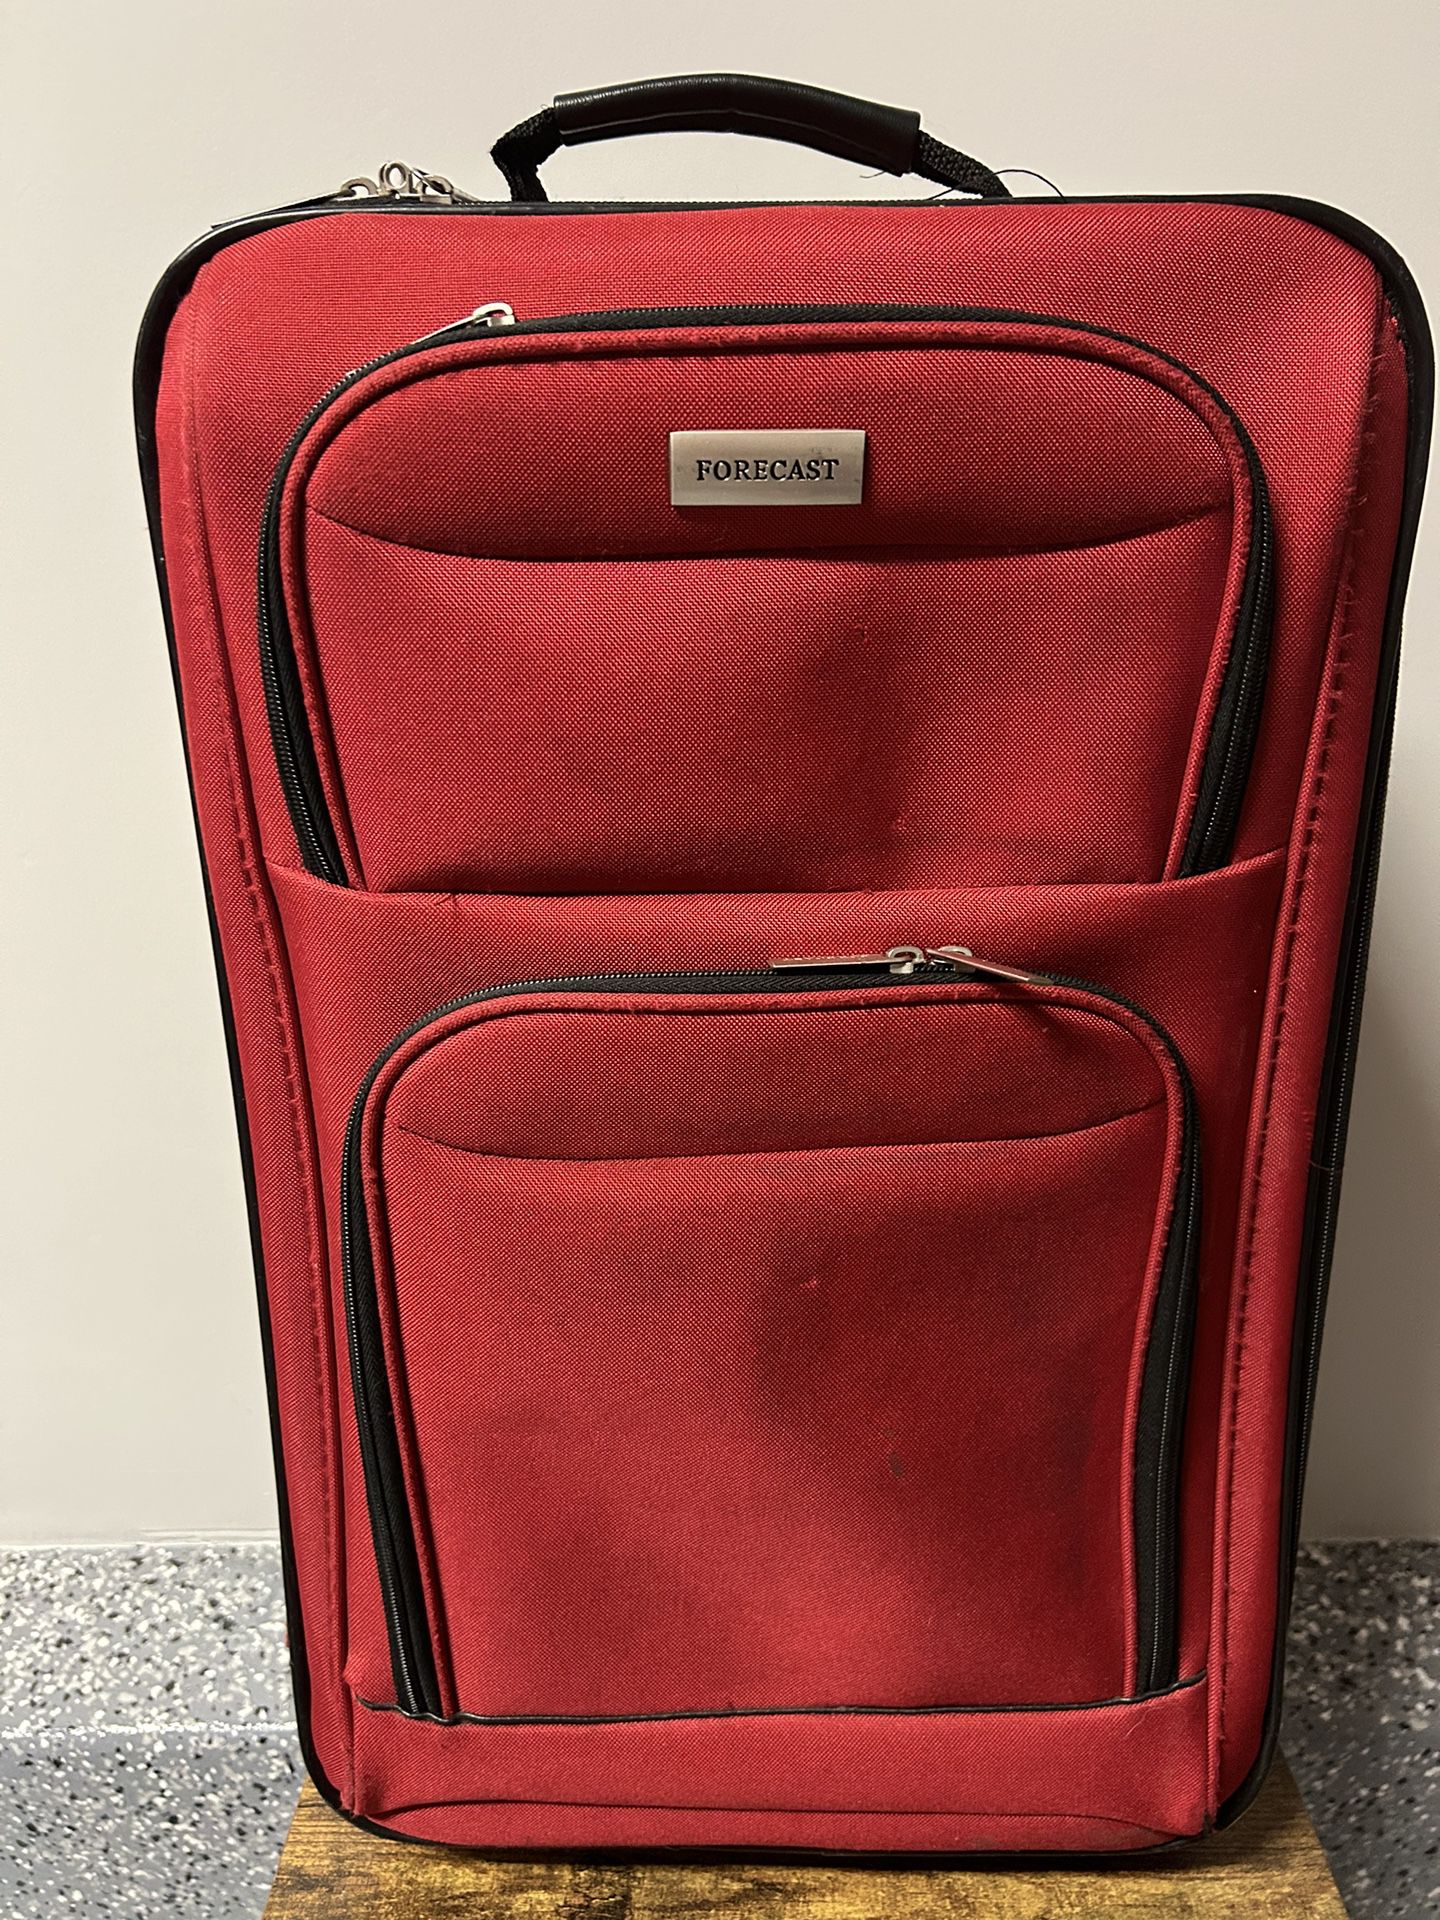 Sears Carry On Luggage 